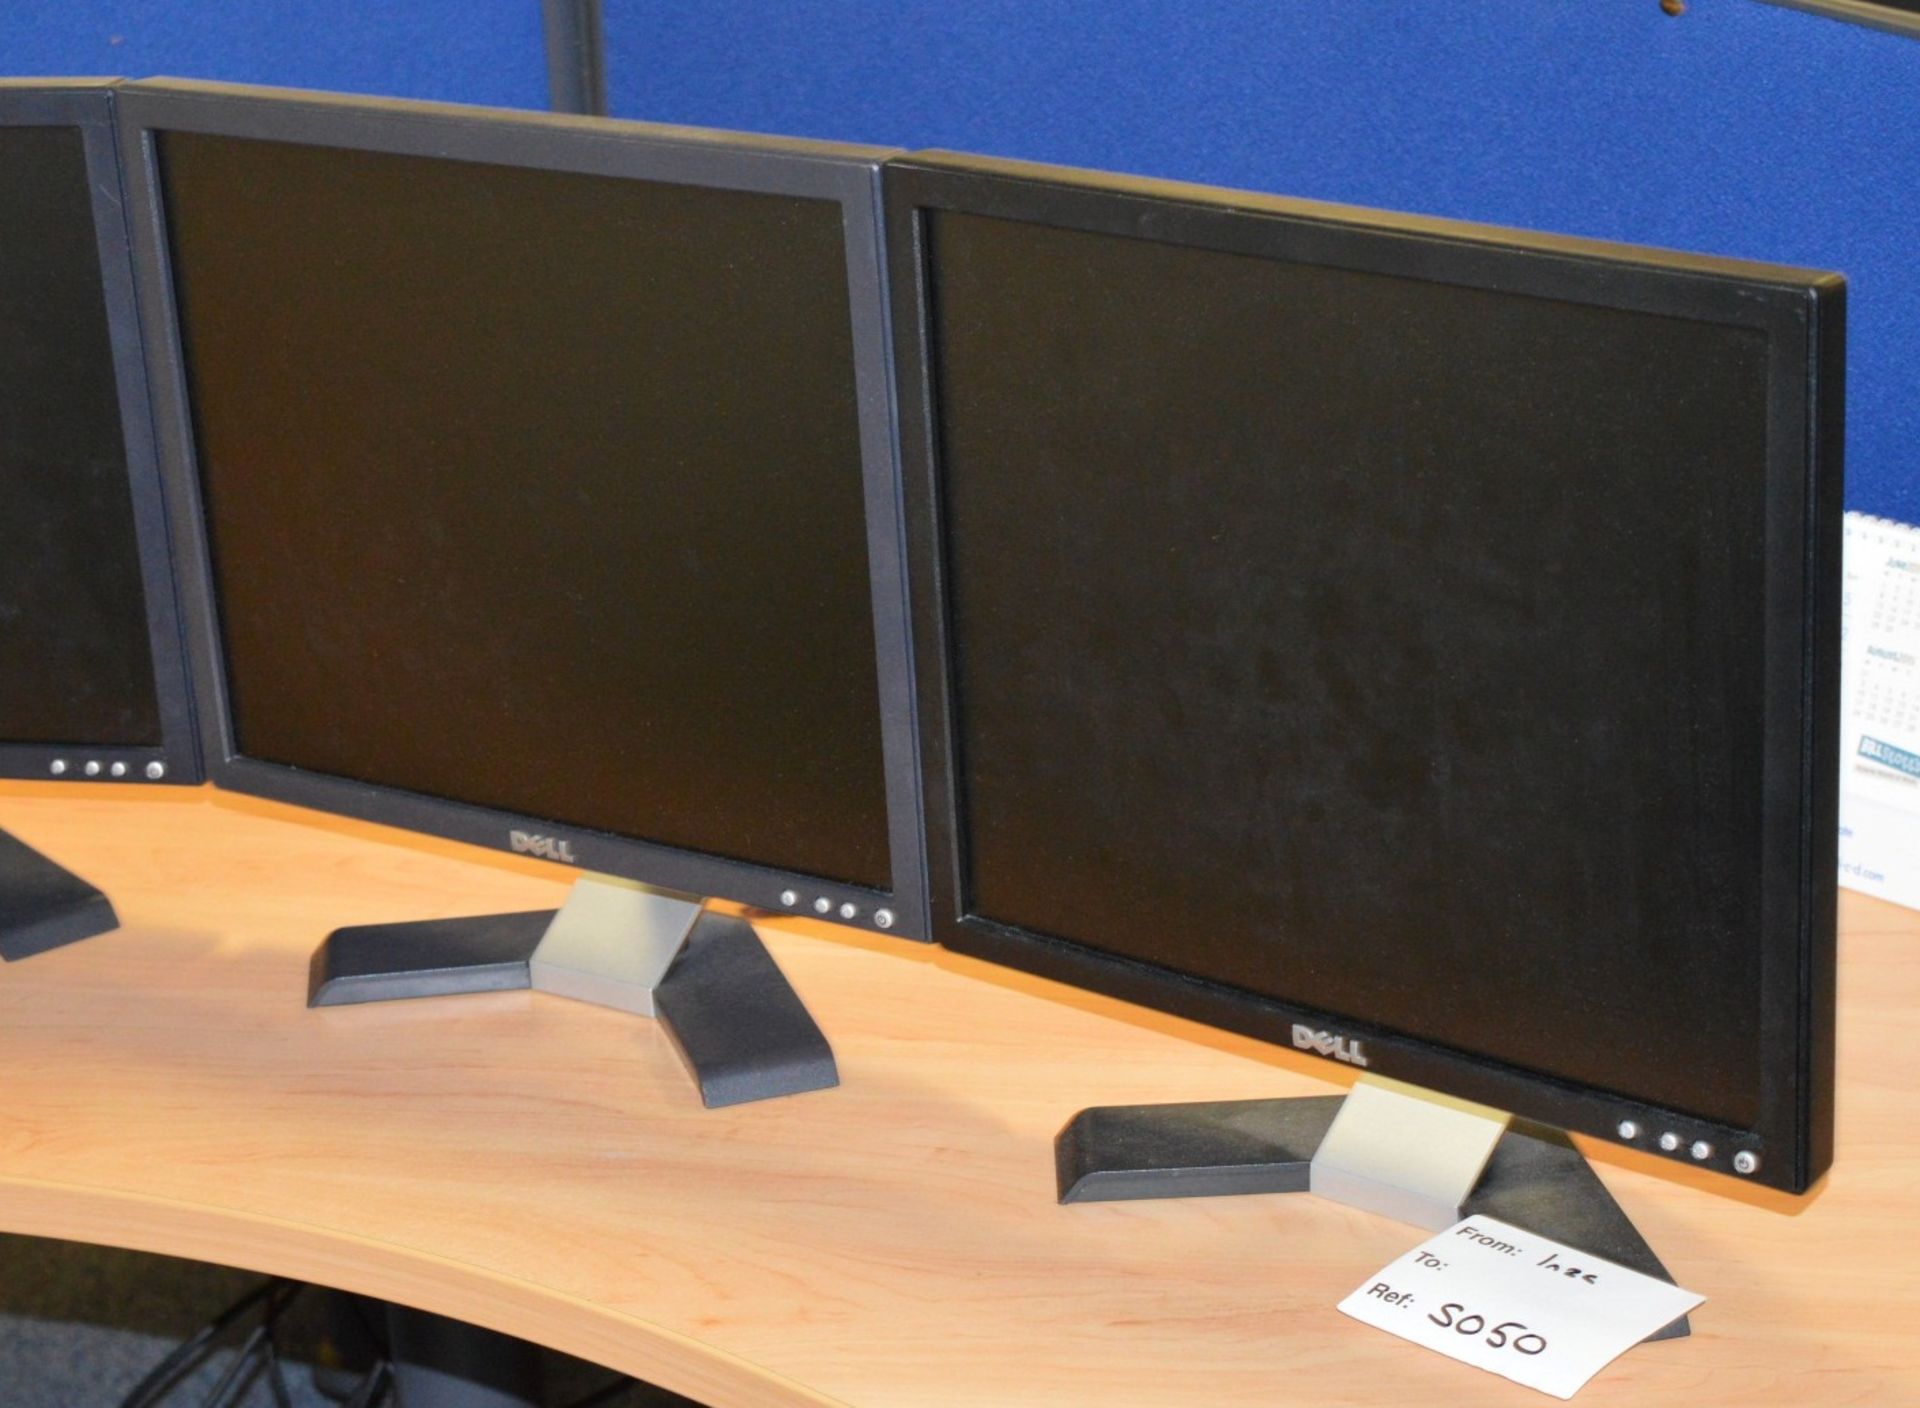 4 x Dell 17 Inch Flatscreen Computer Monitors - Without Cables - CL300 - Ref S050 - Location: - Image 3 of 4